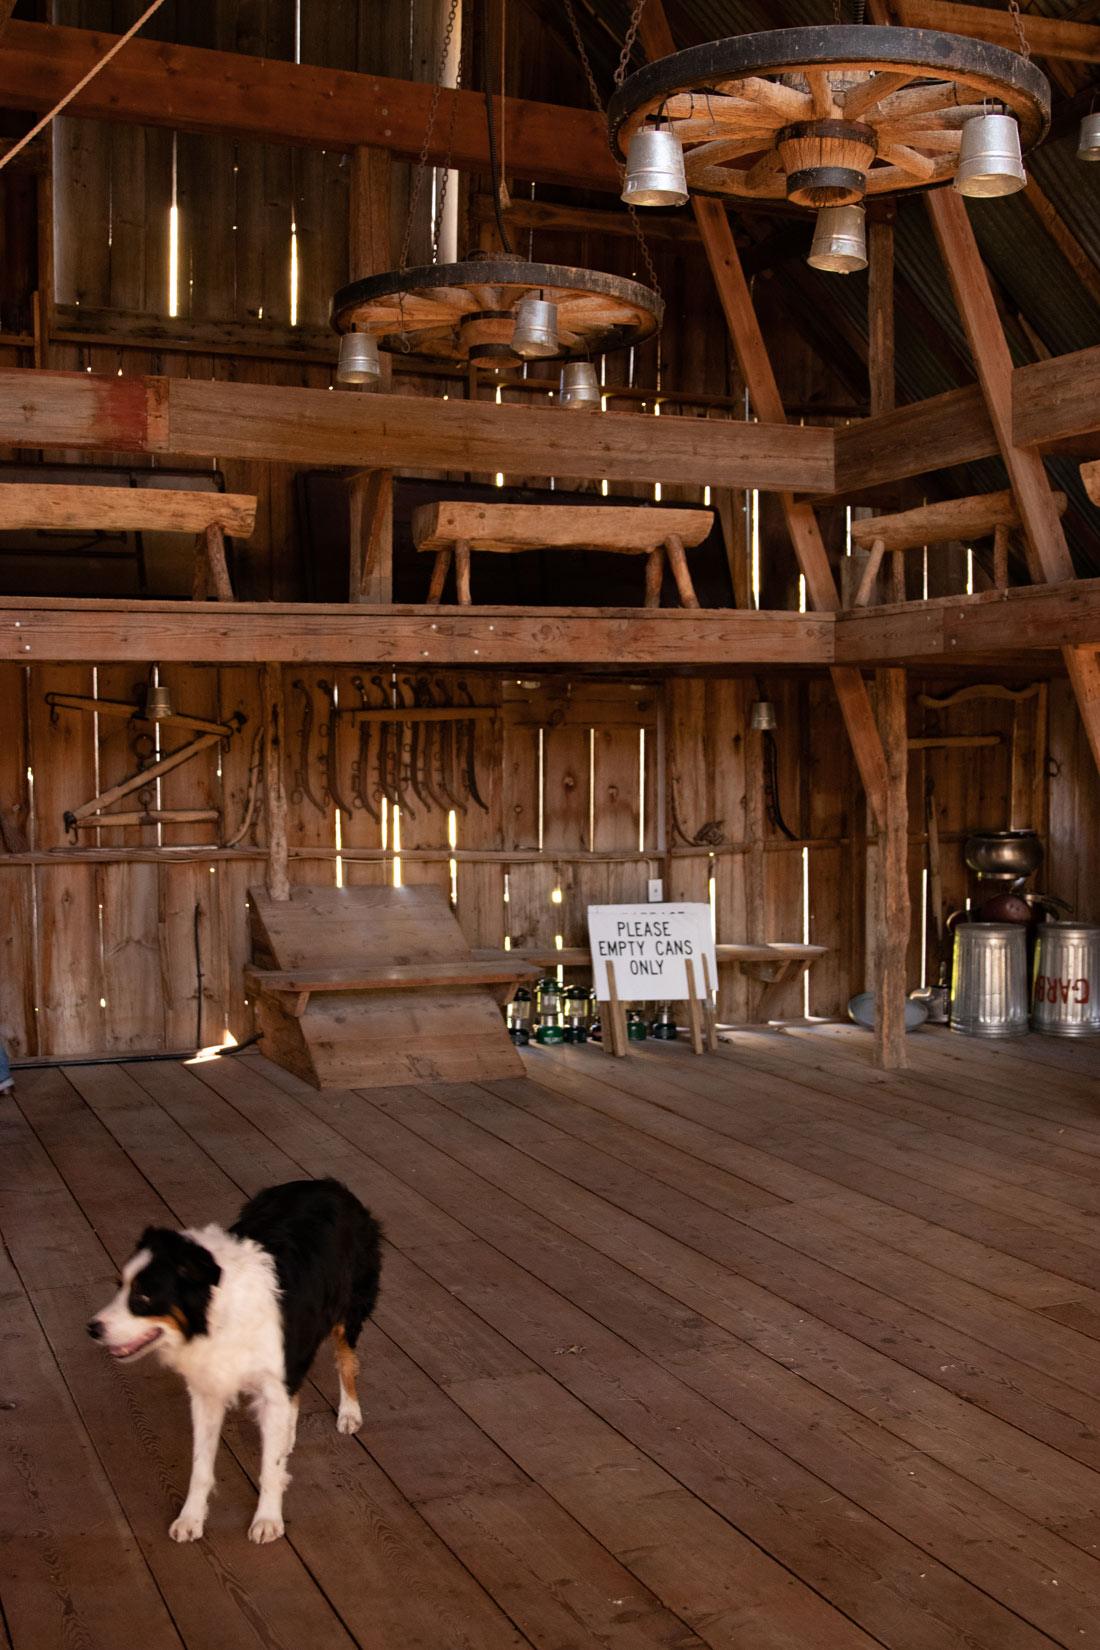 We explore the inside of the Prohibition era barn on the grounds